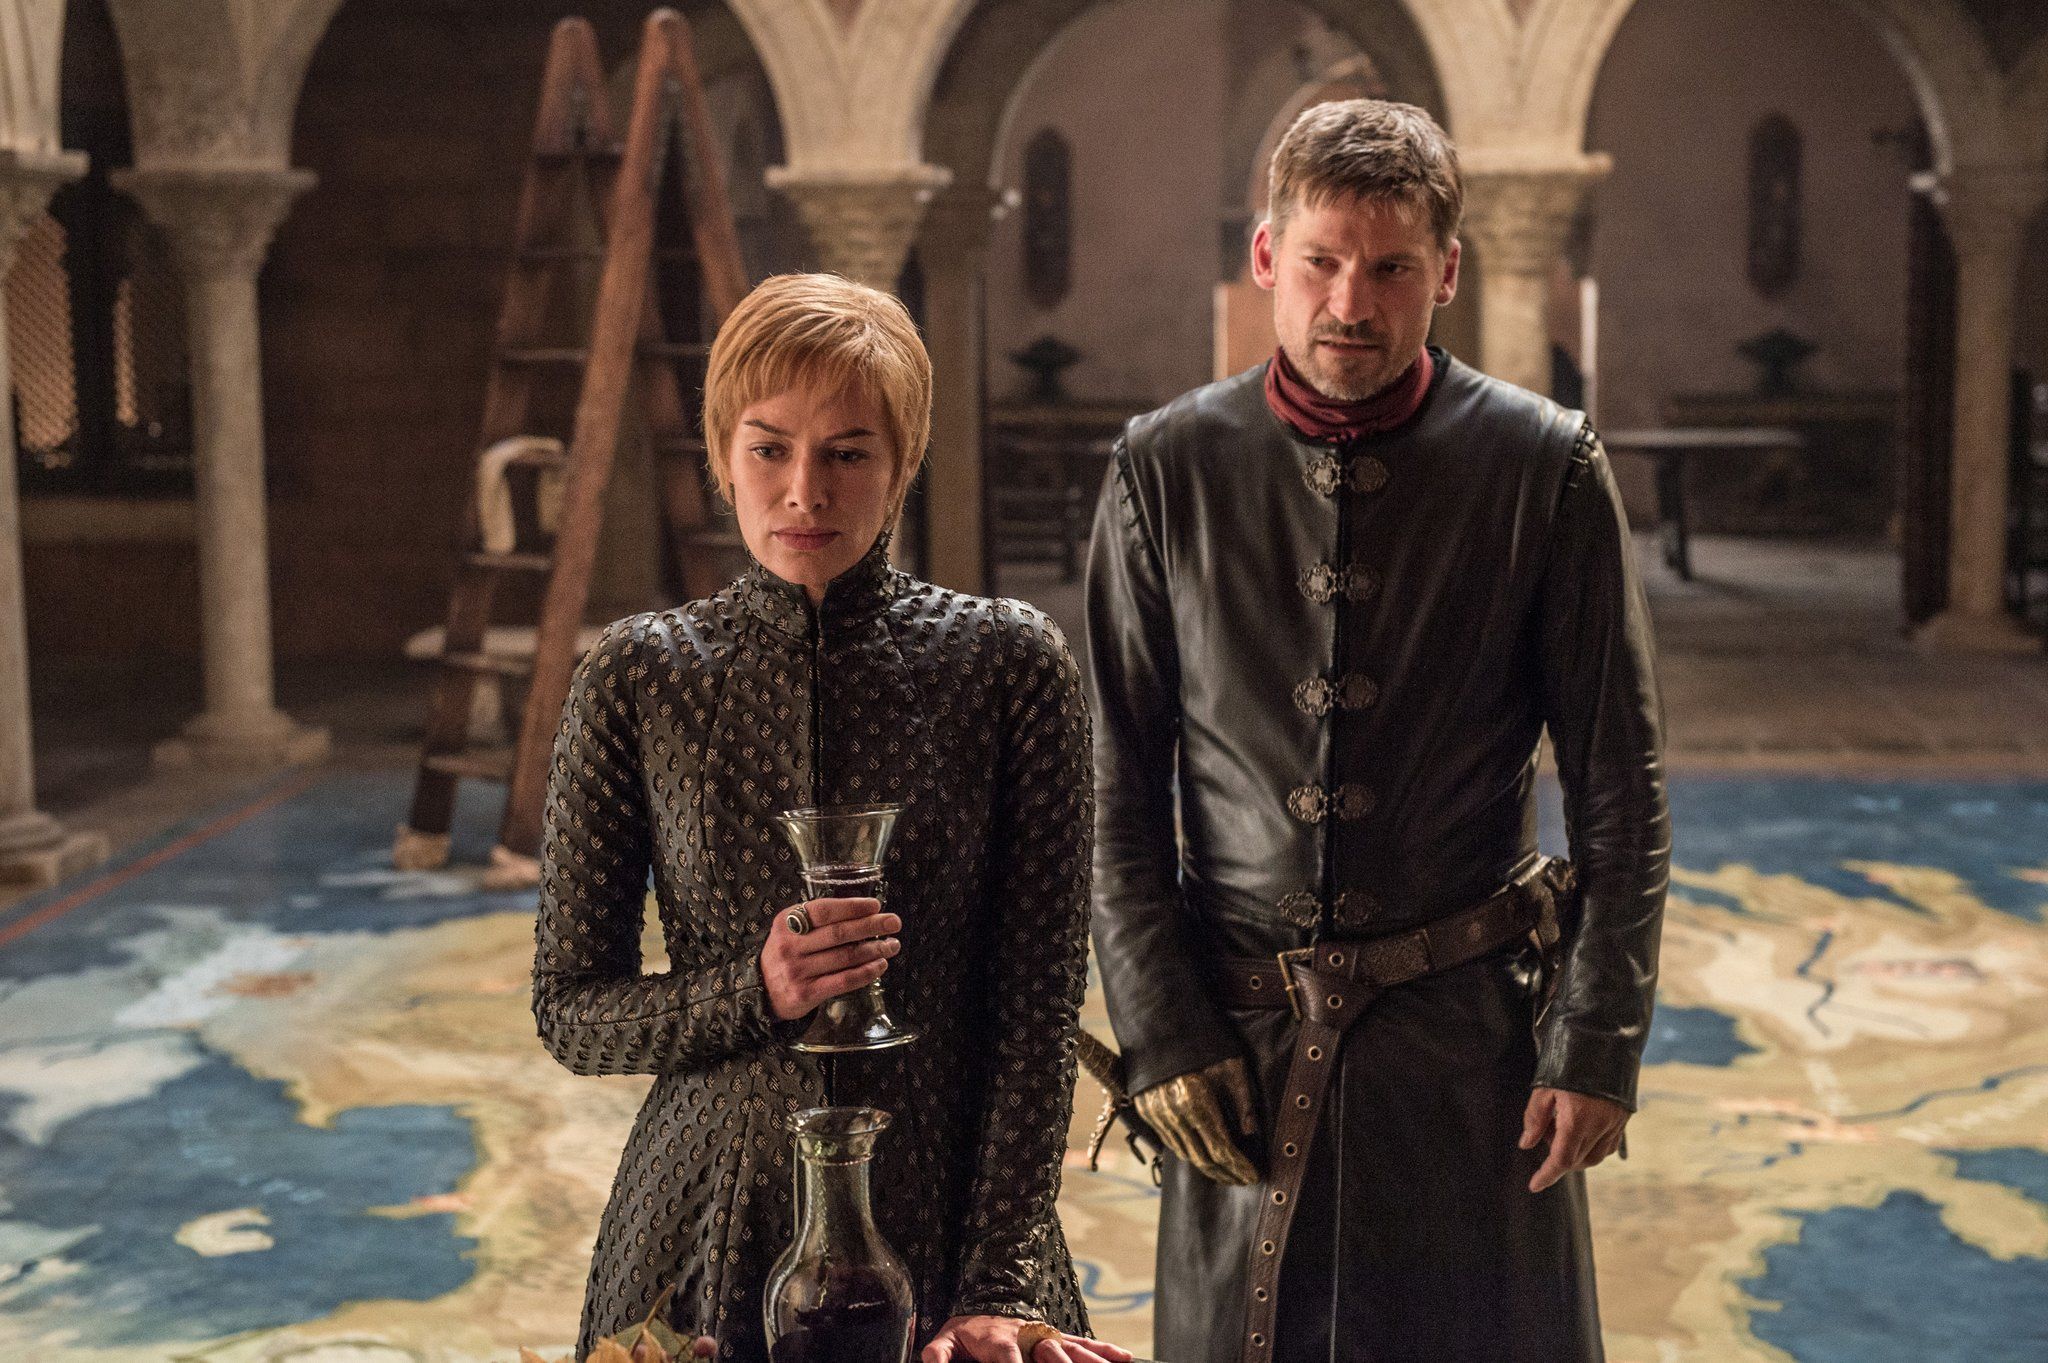 Cersei holds a glass and stands next to Jaime Lannister 